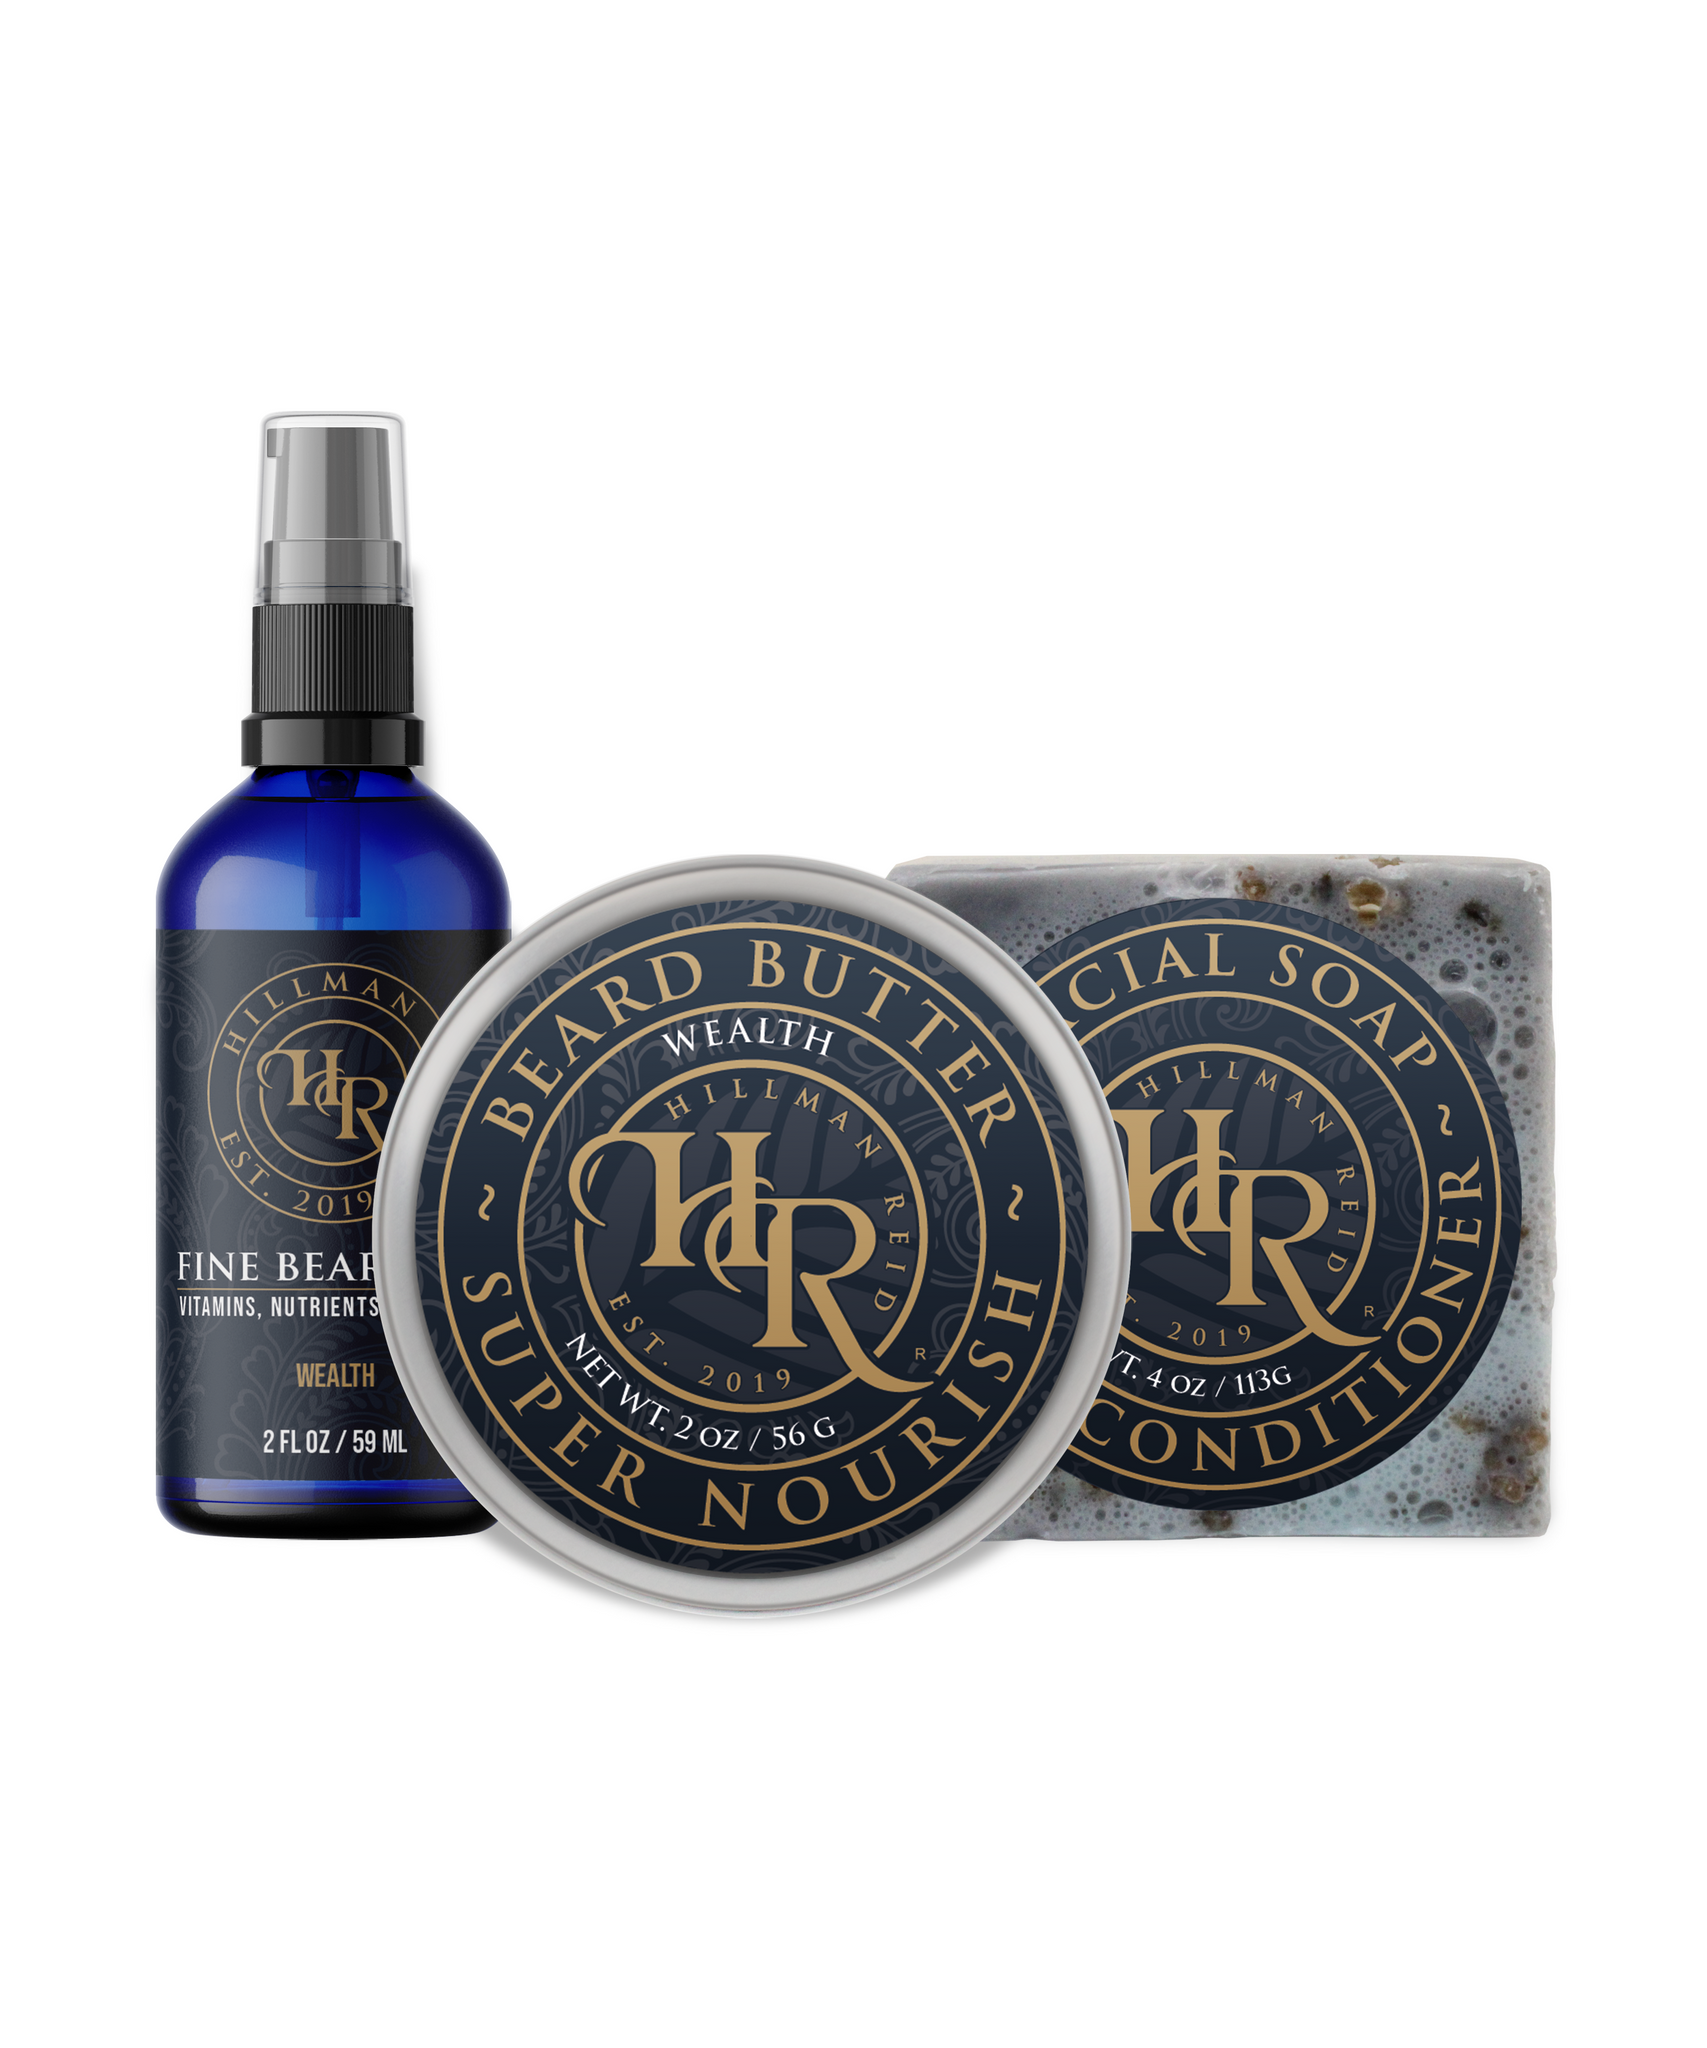 Beard Refill Bundle - What's Your Chic